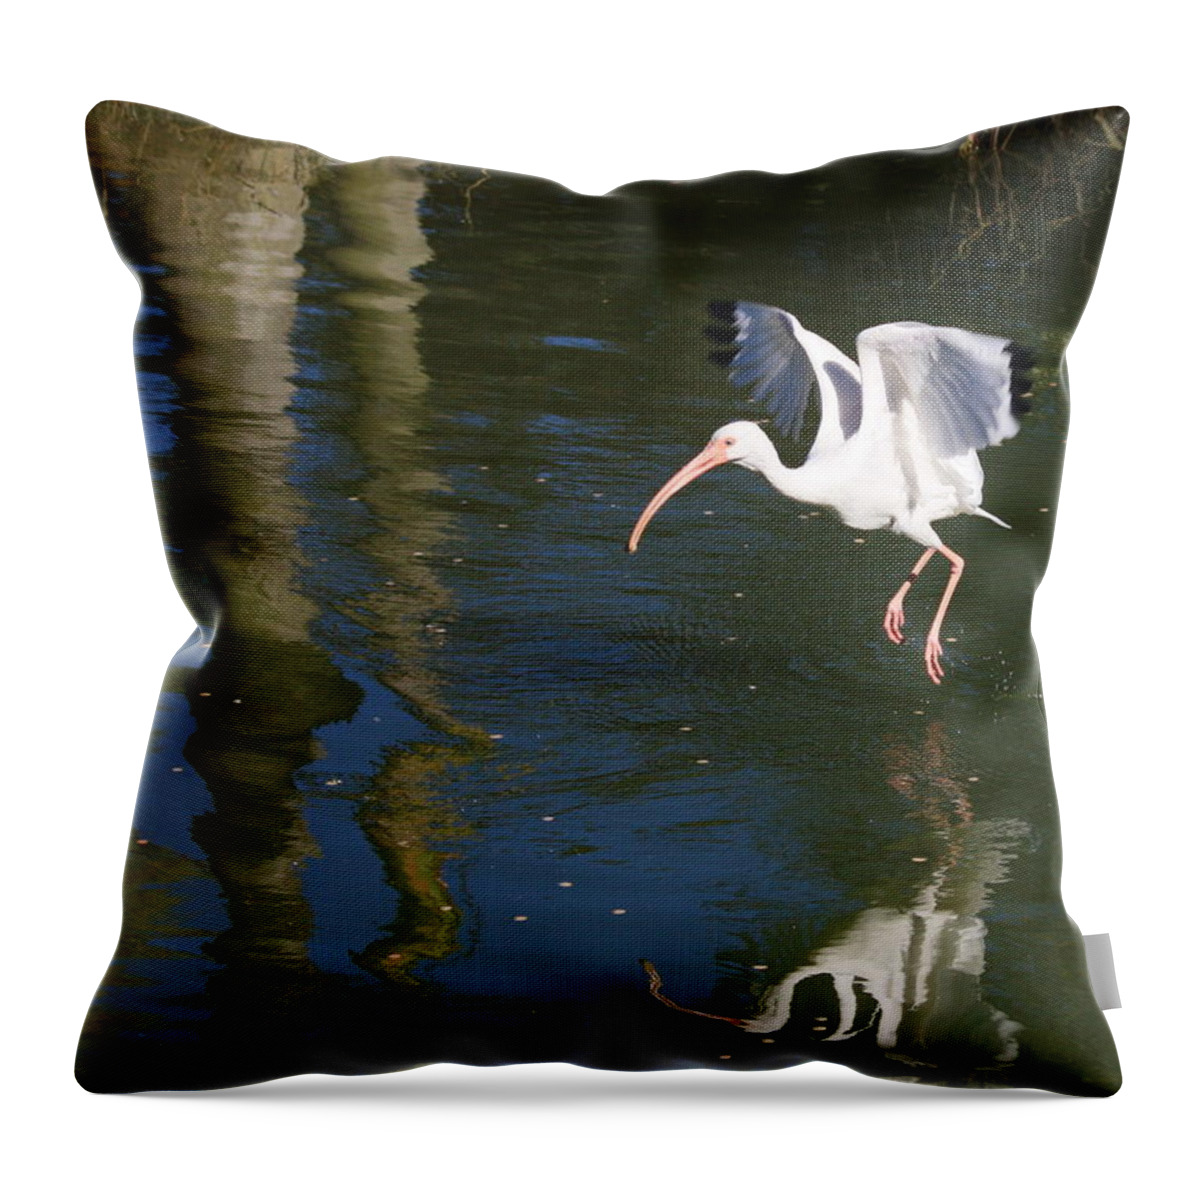 Flight Throw Pillow featuring the photograph Suspended in Flight by Carol Groenen